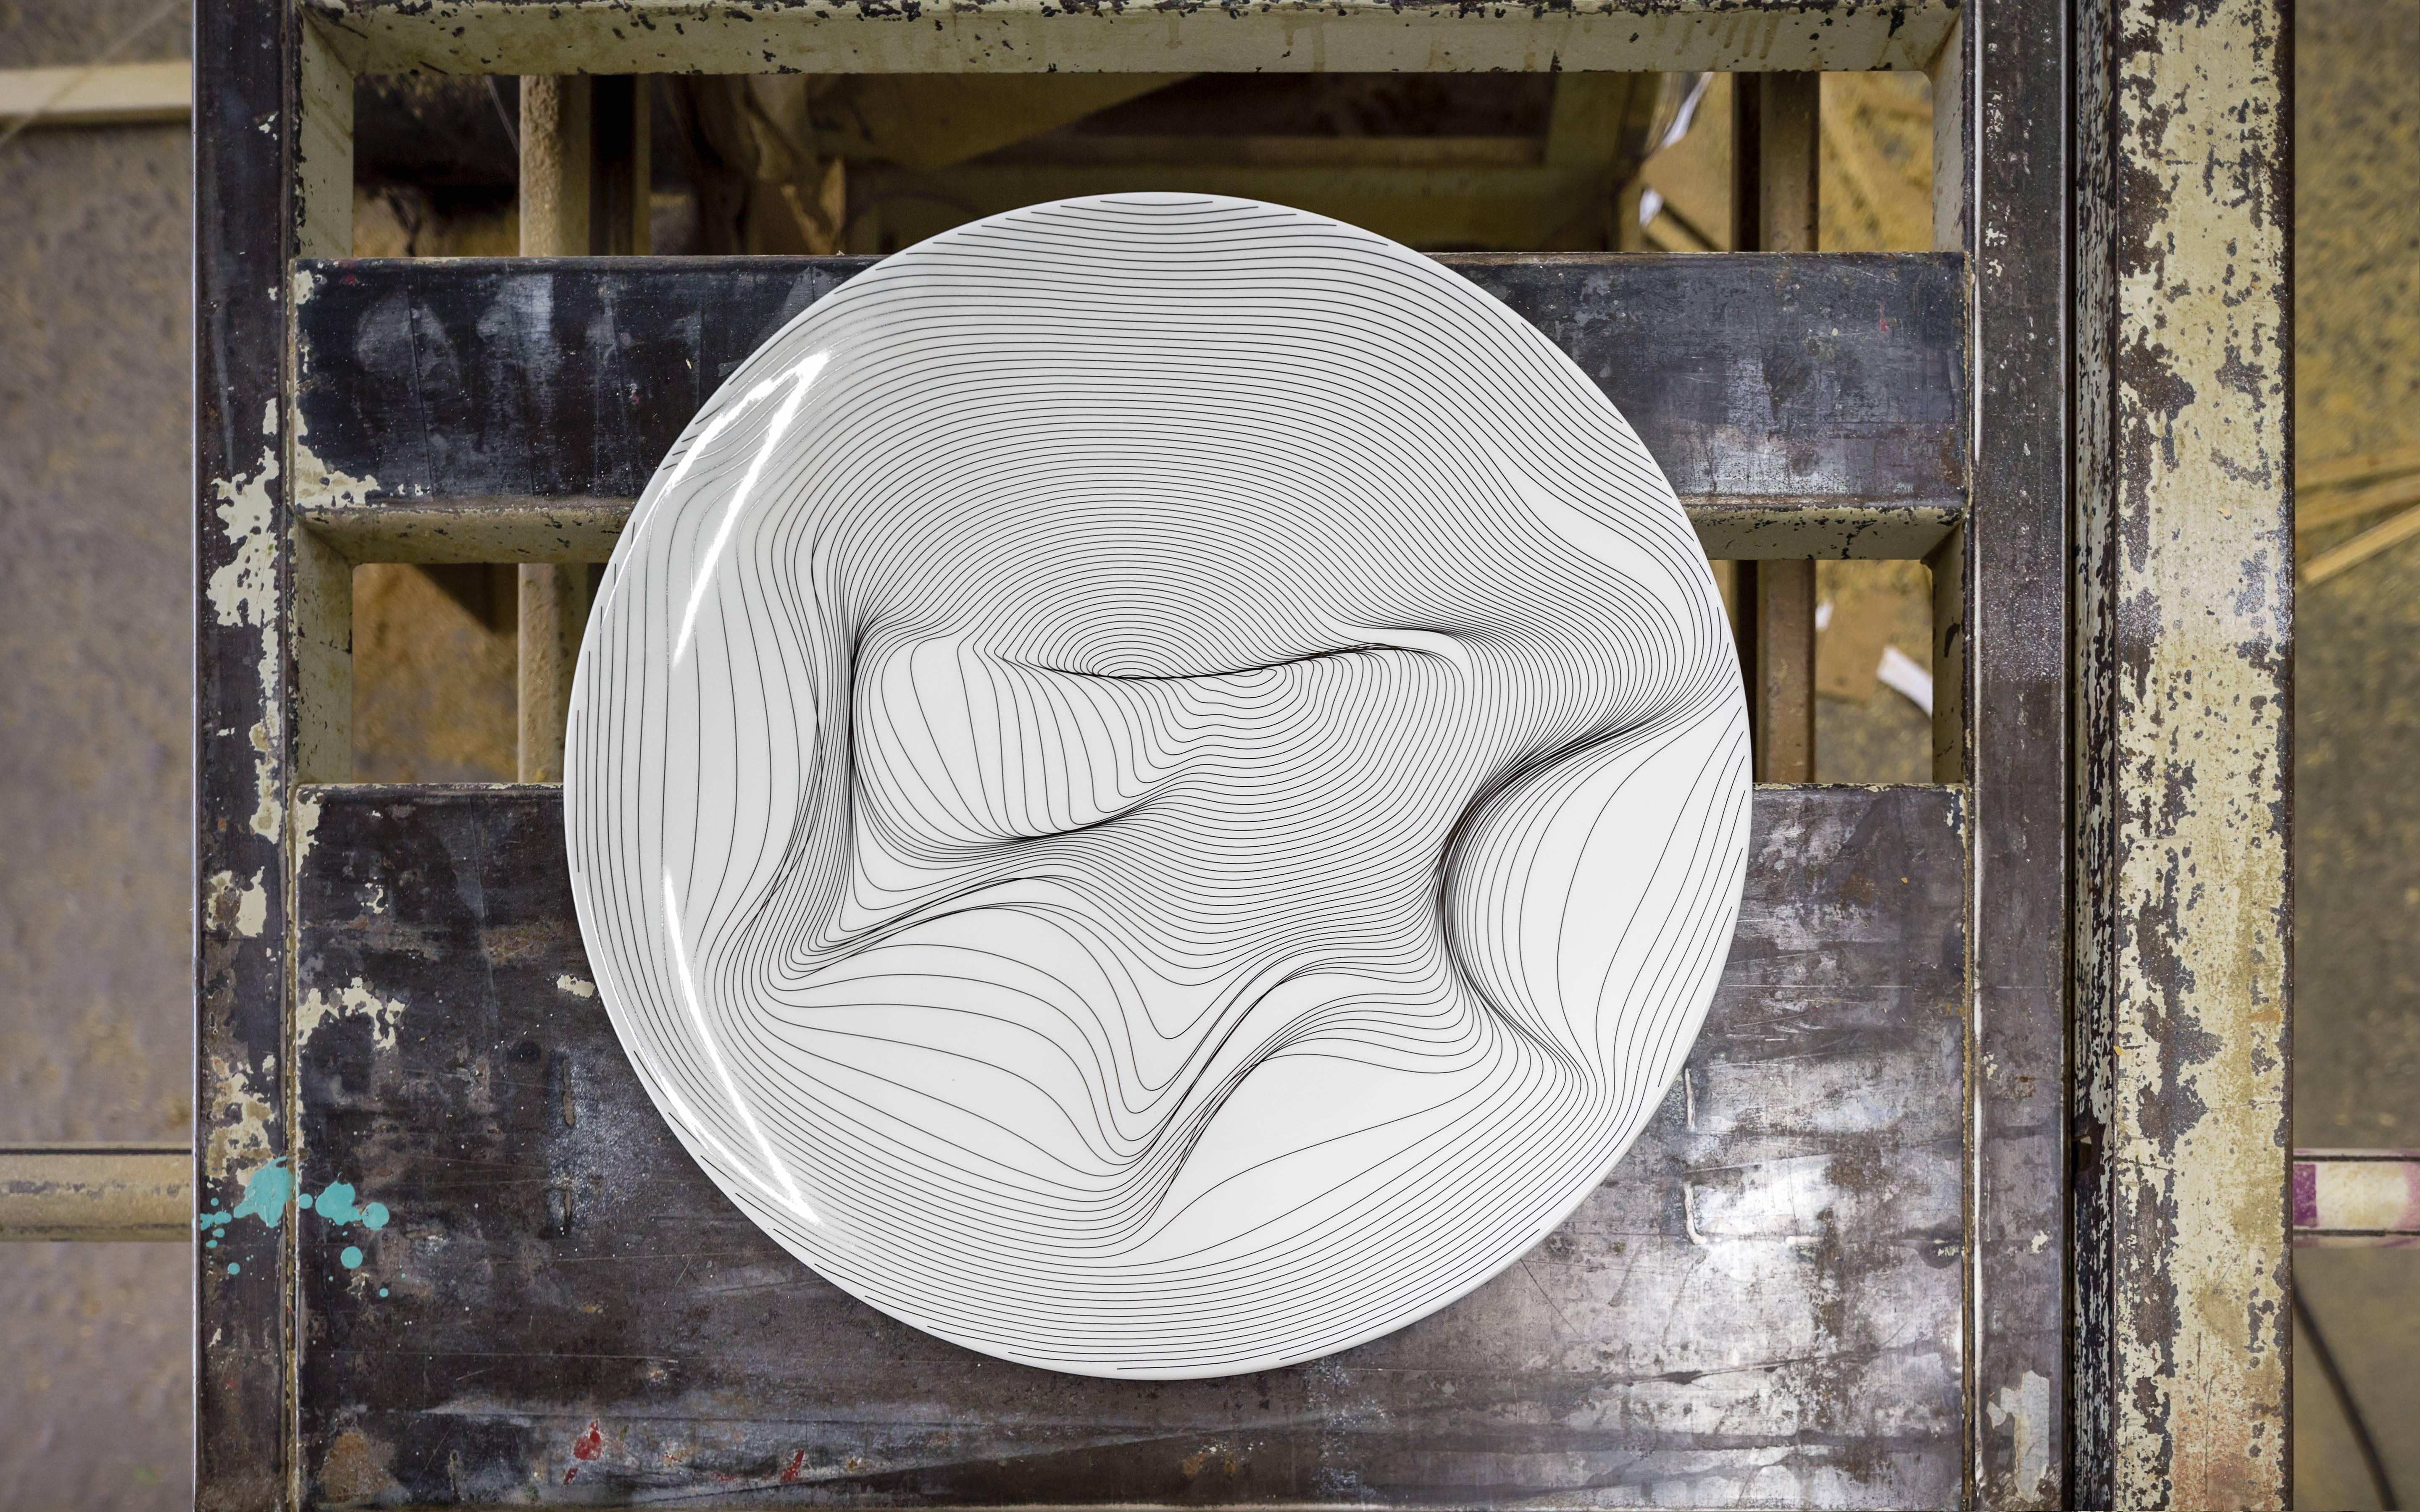 P.li is a platter whose drawing was developed through a parametric software and it is composed of concentric lines (a radial grid) and some points that either attract or repel these lines. The change in position of these points will alters the whole